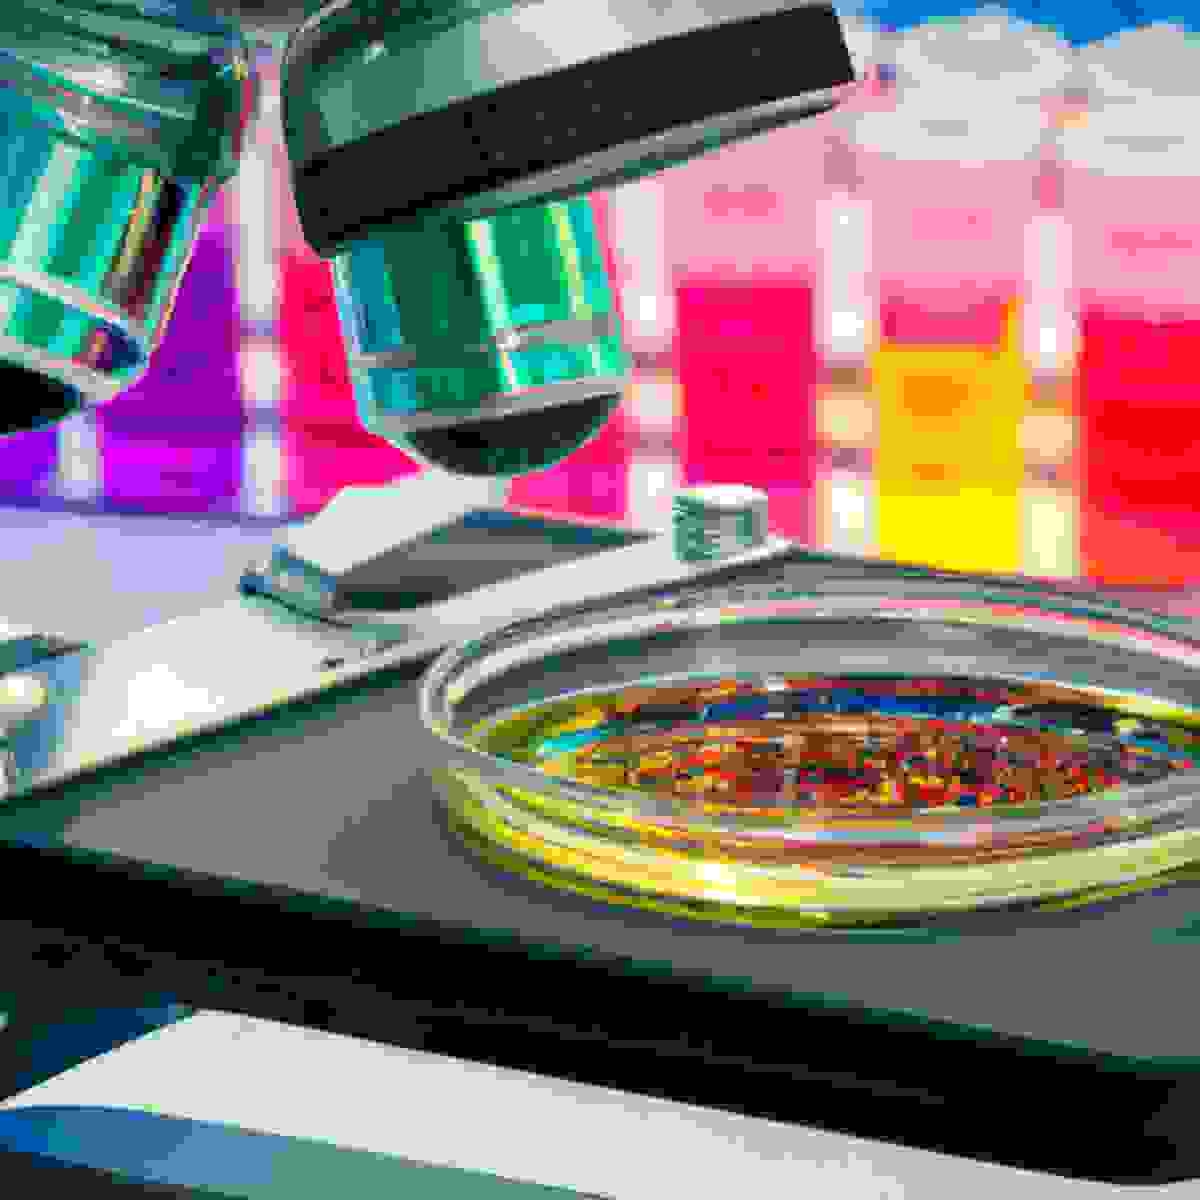 Close-up of state-of-the-art microscope focused on vibrant, multi-colored solution in petri dish, surrounded by scientific instruments, conveying hope and progress in Harlequin Ichthyosis treatment research.